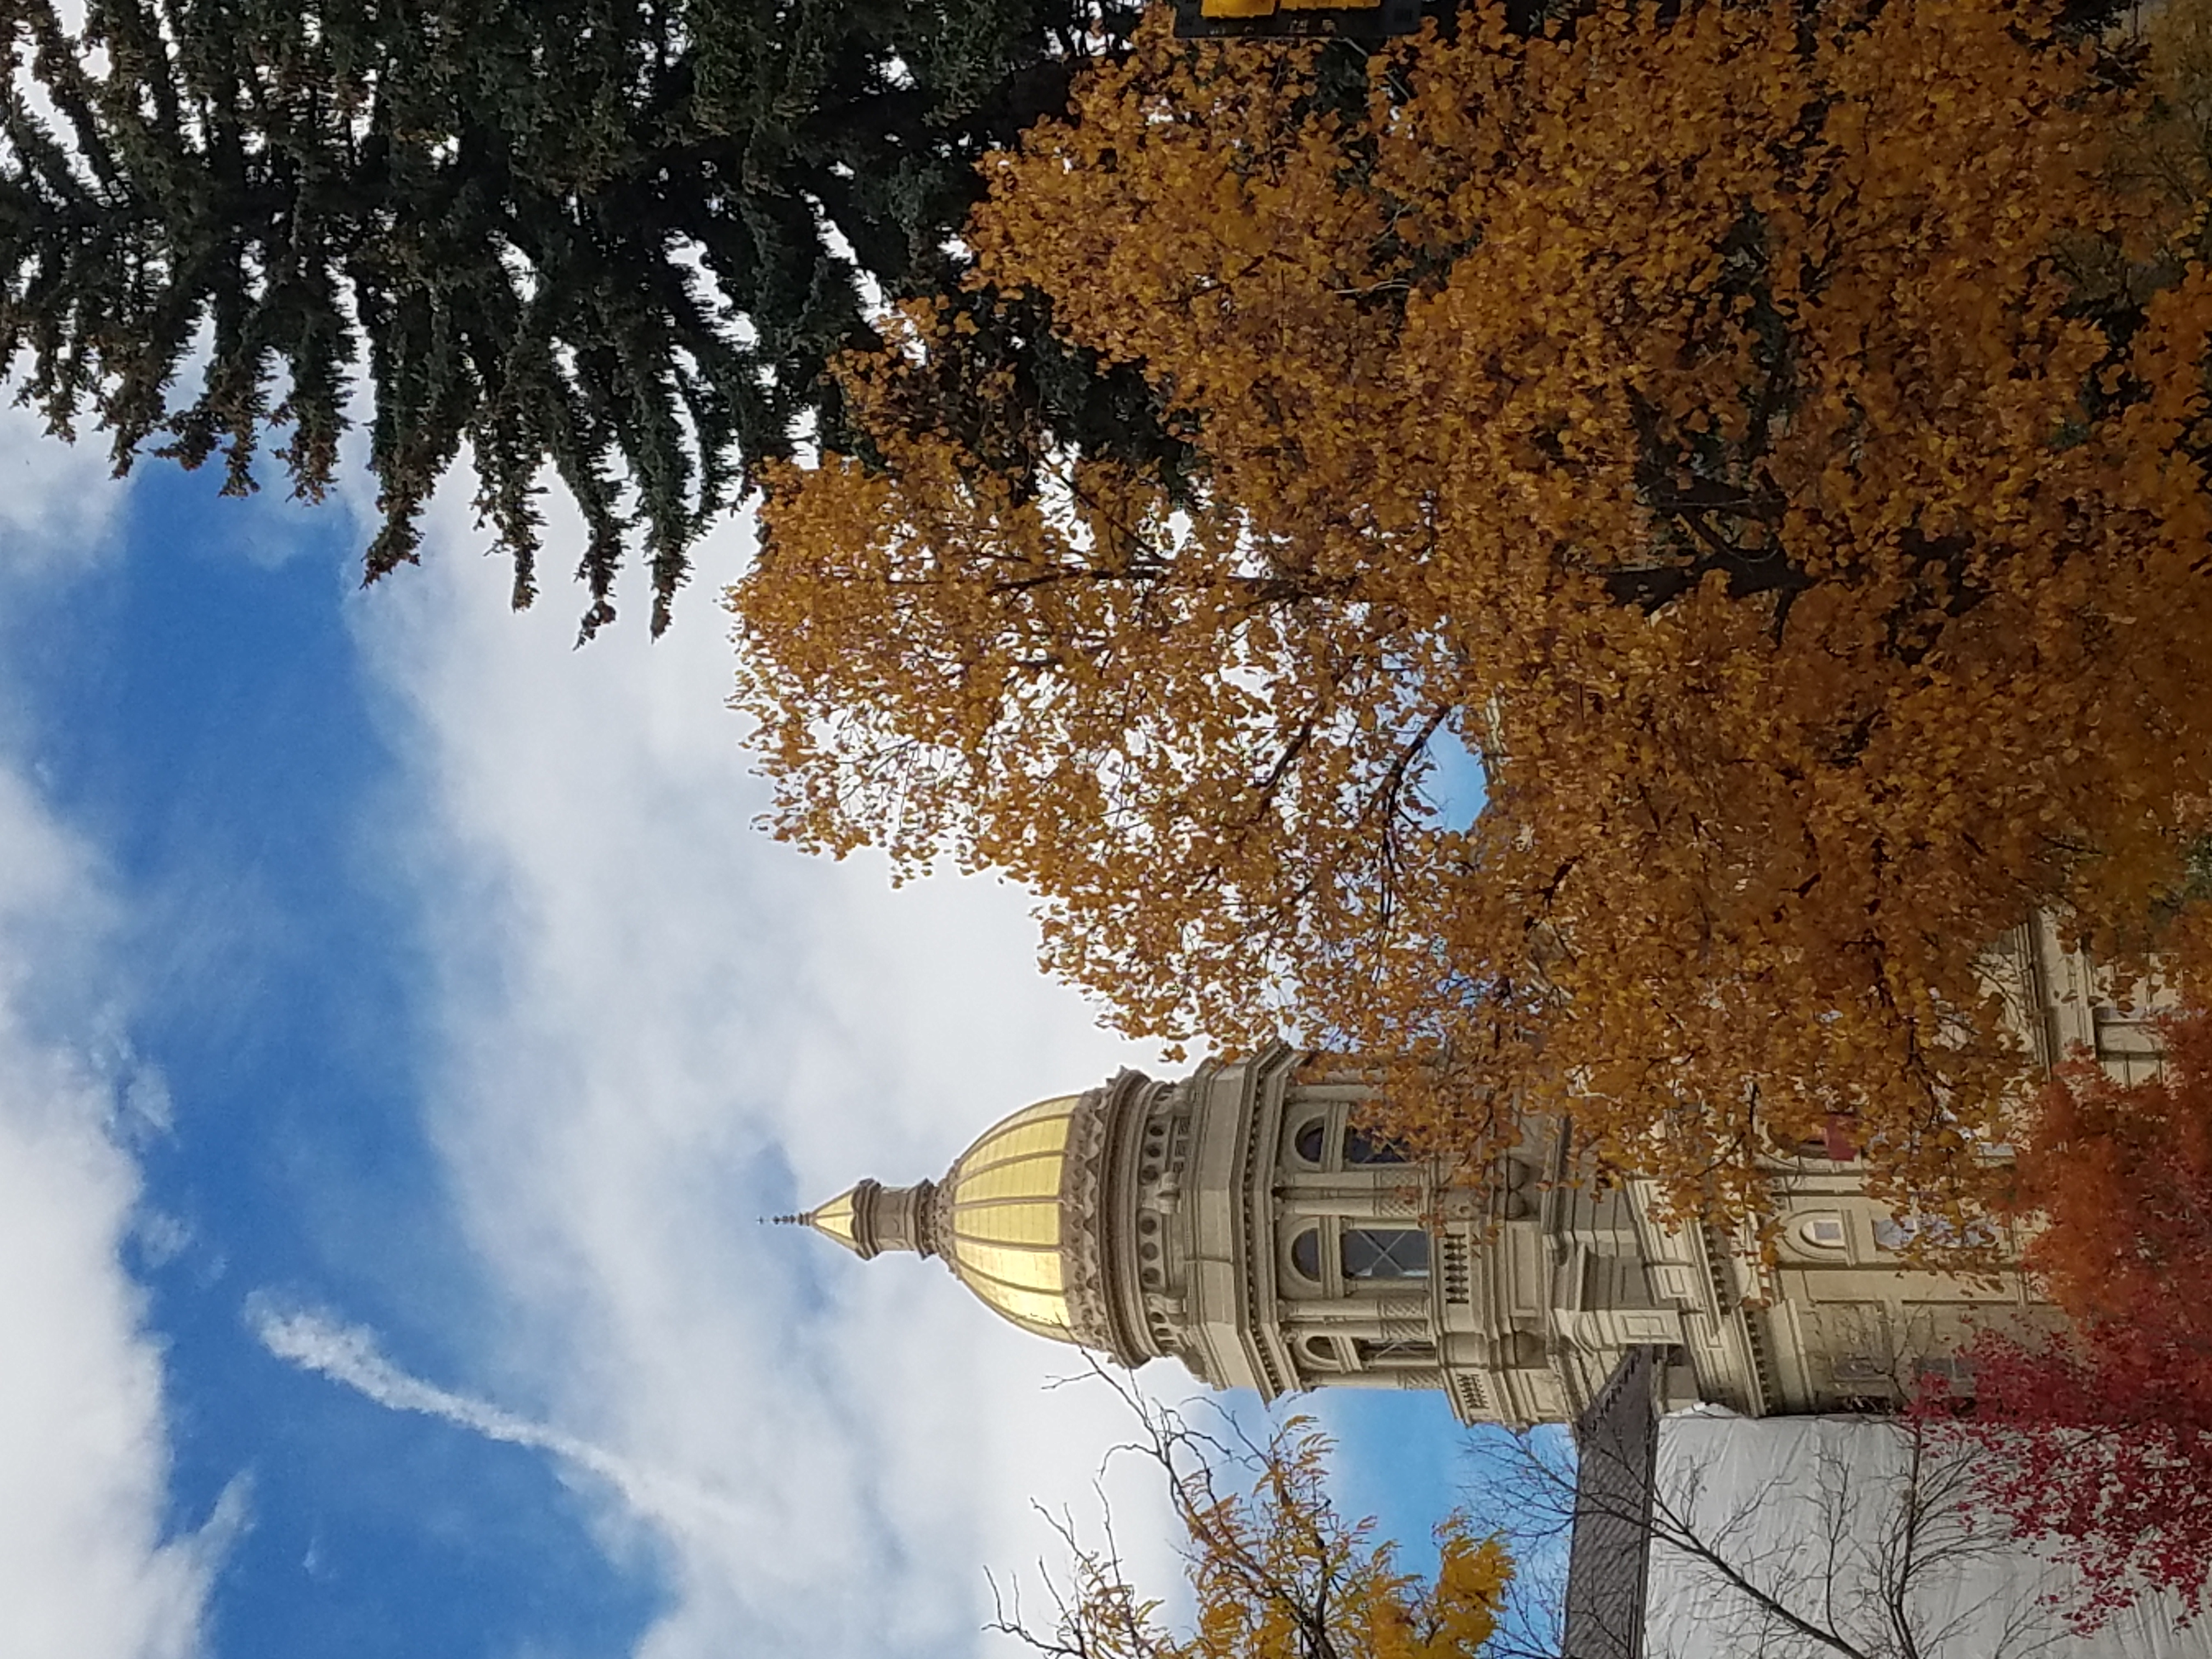 Wyoming State Capitol with fall foliage in front of blue skies with brilliant white clouds